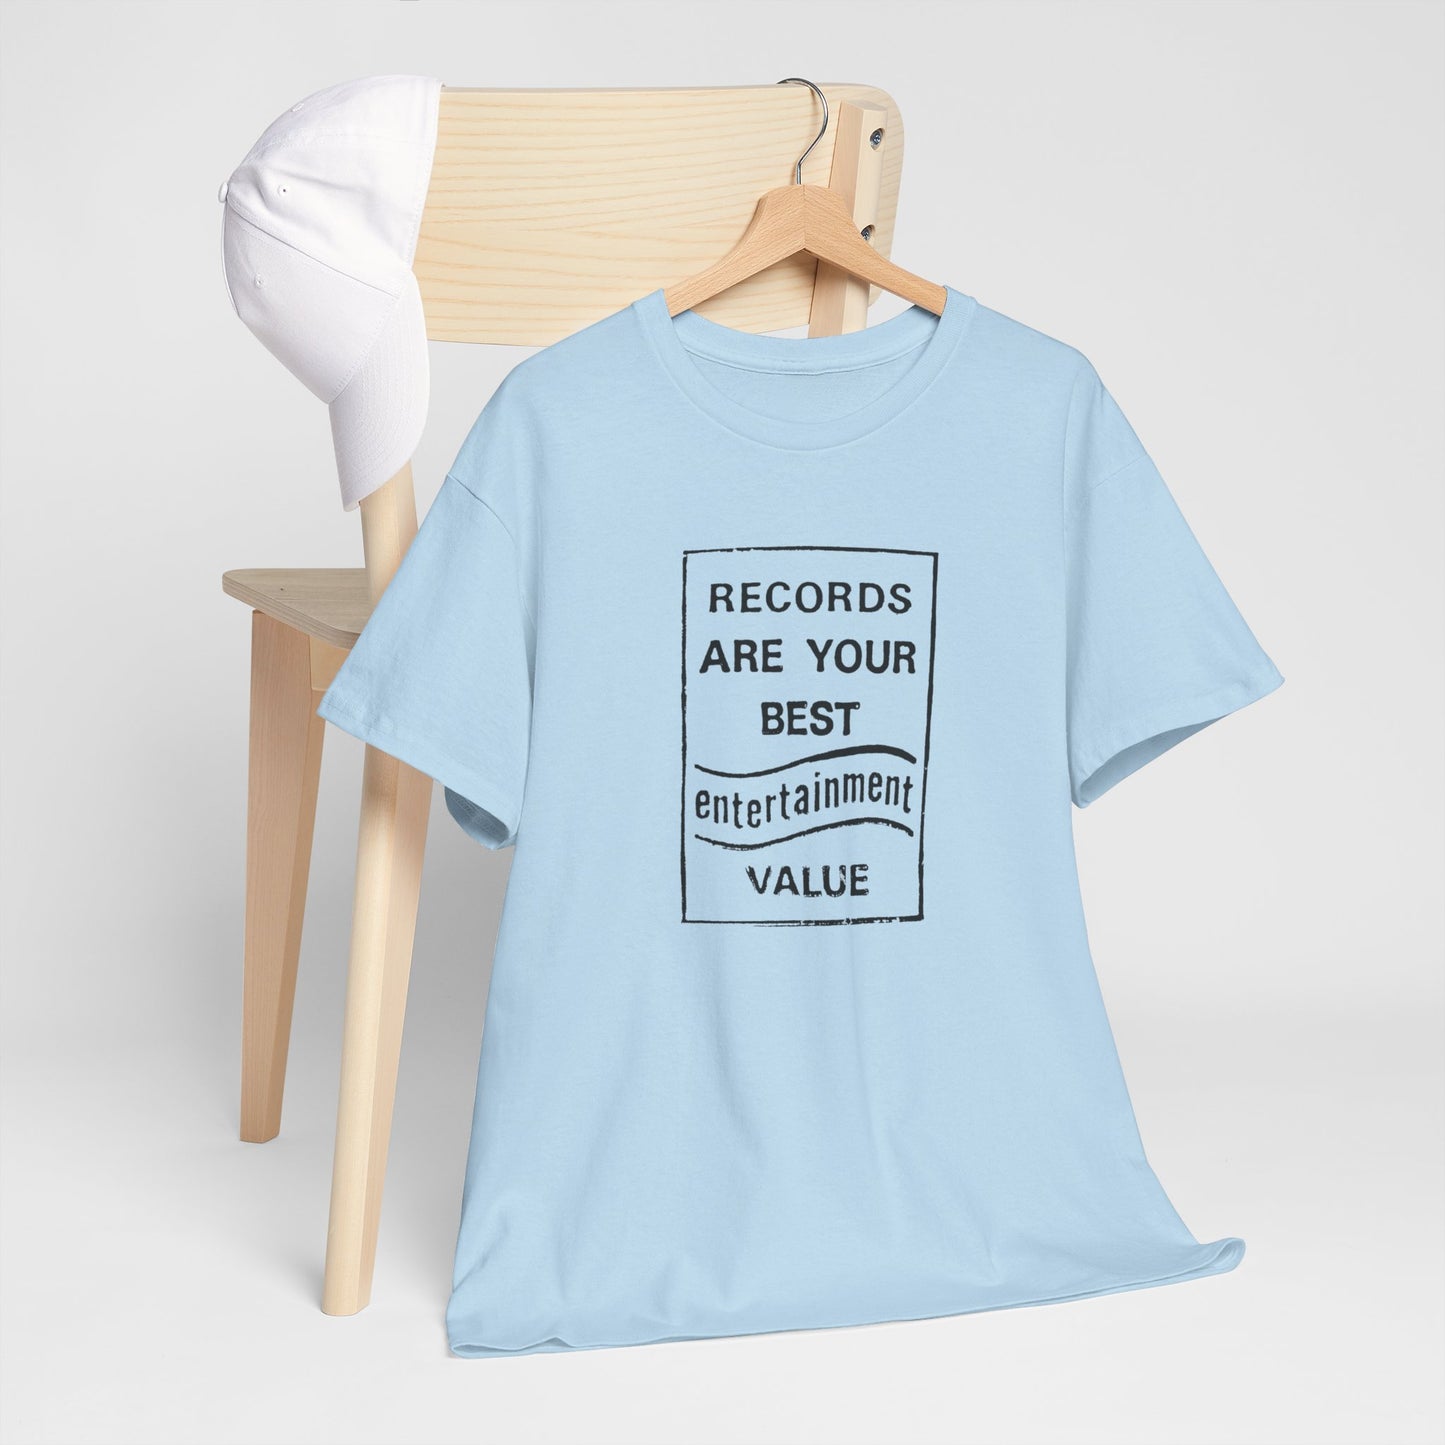 Retro Tee #205: Records Are Your Best Entertainment Value